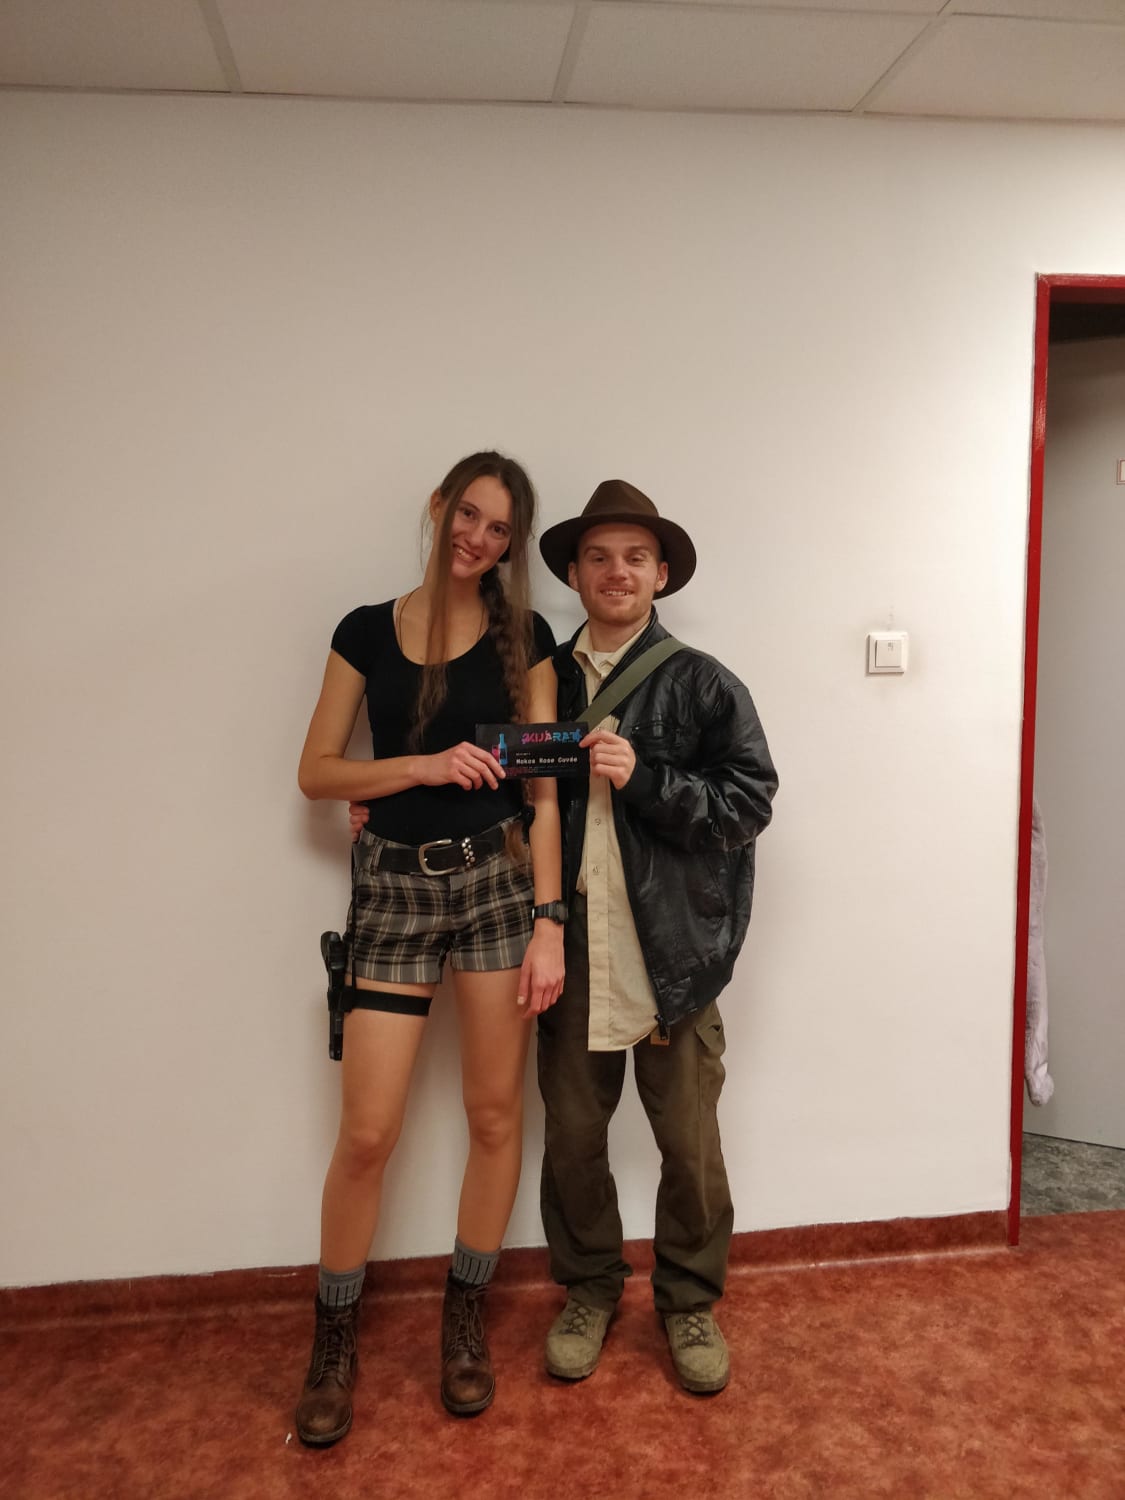 Me and my boyfriend win first prize as Indiana Jones and Lara Croft. We're both archeologists btw